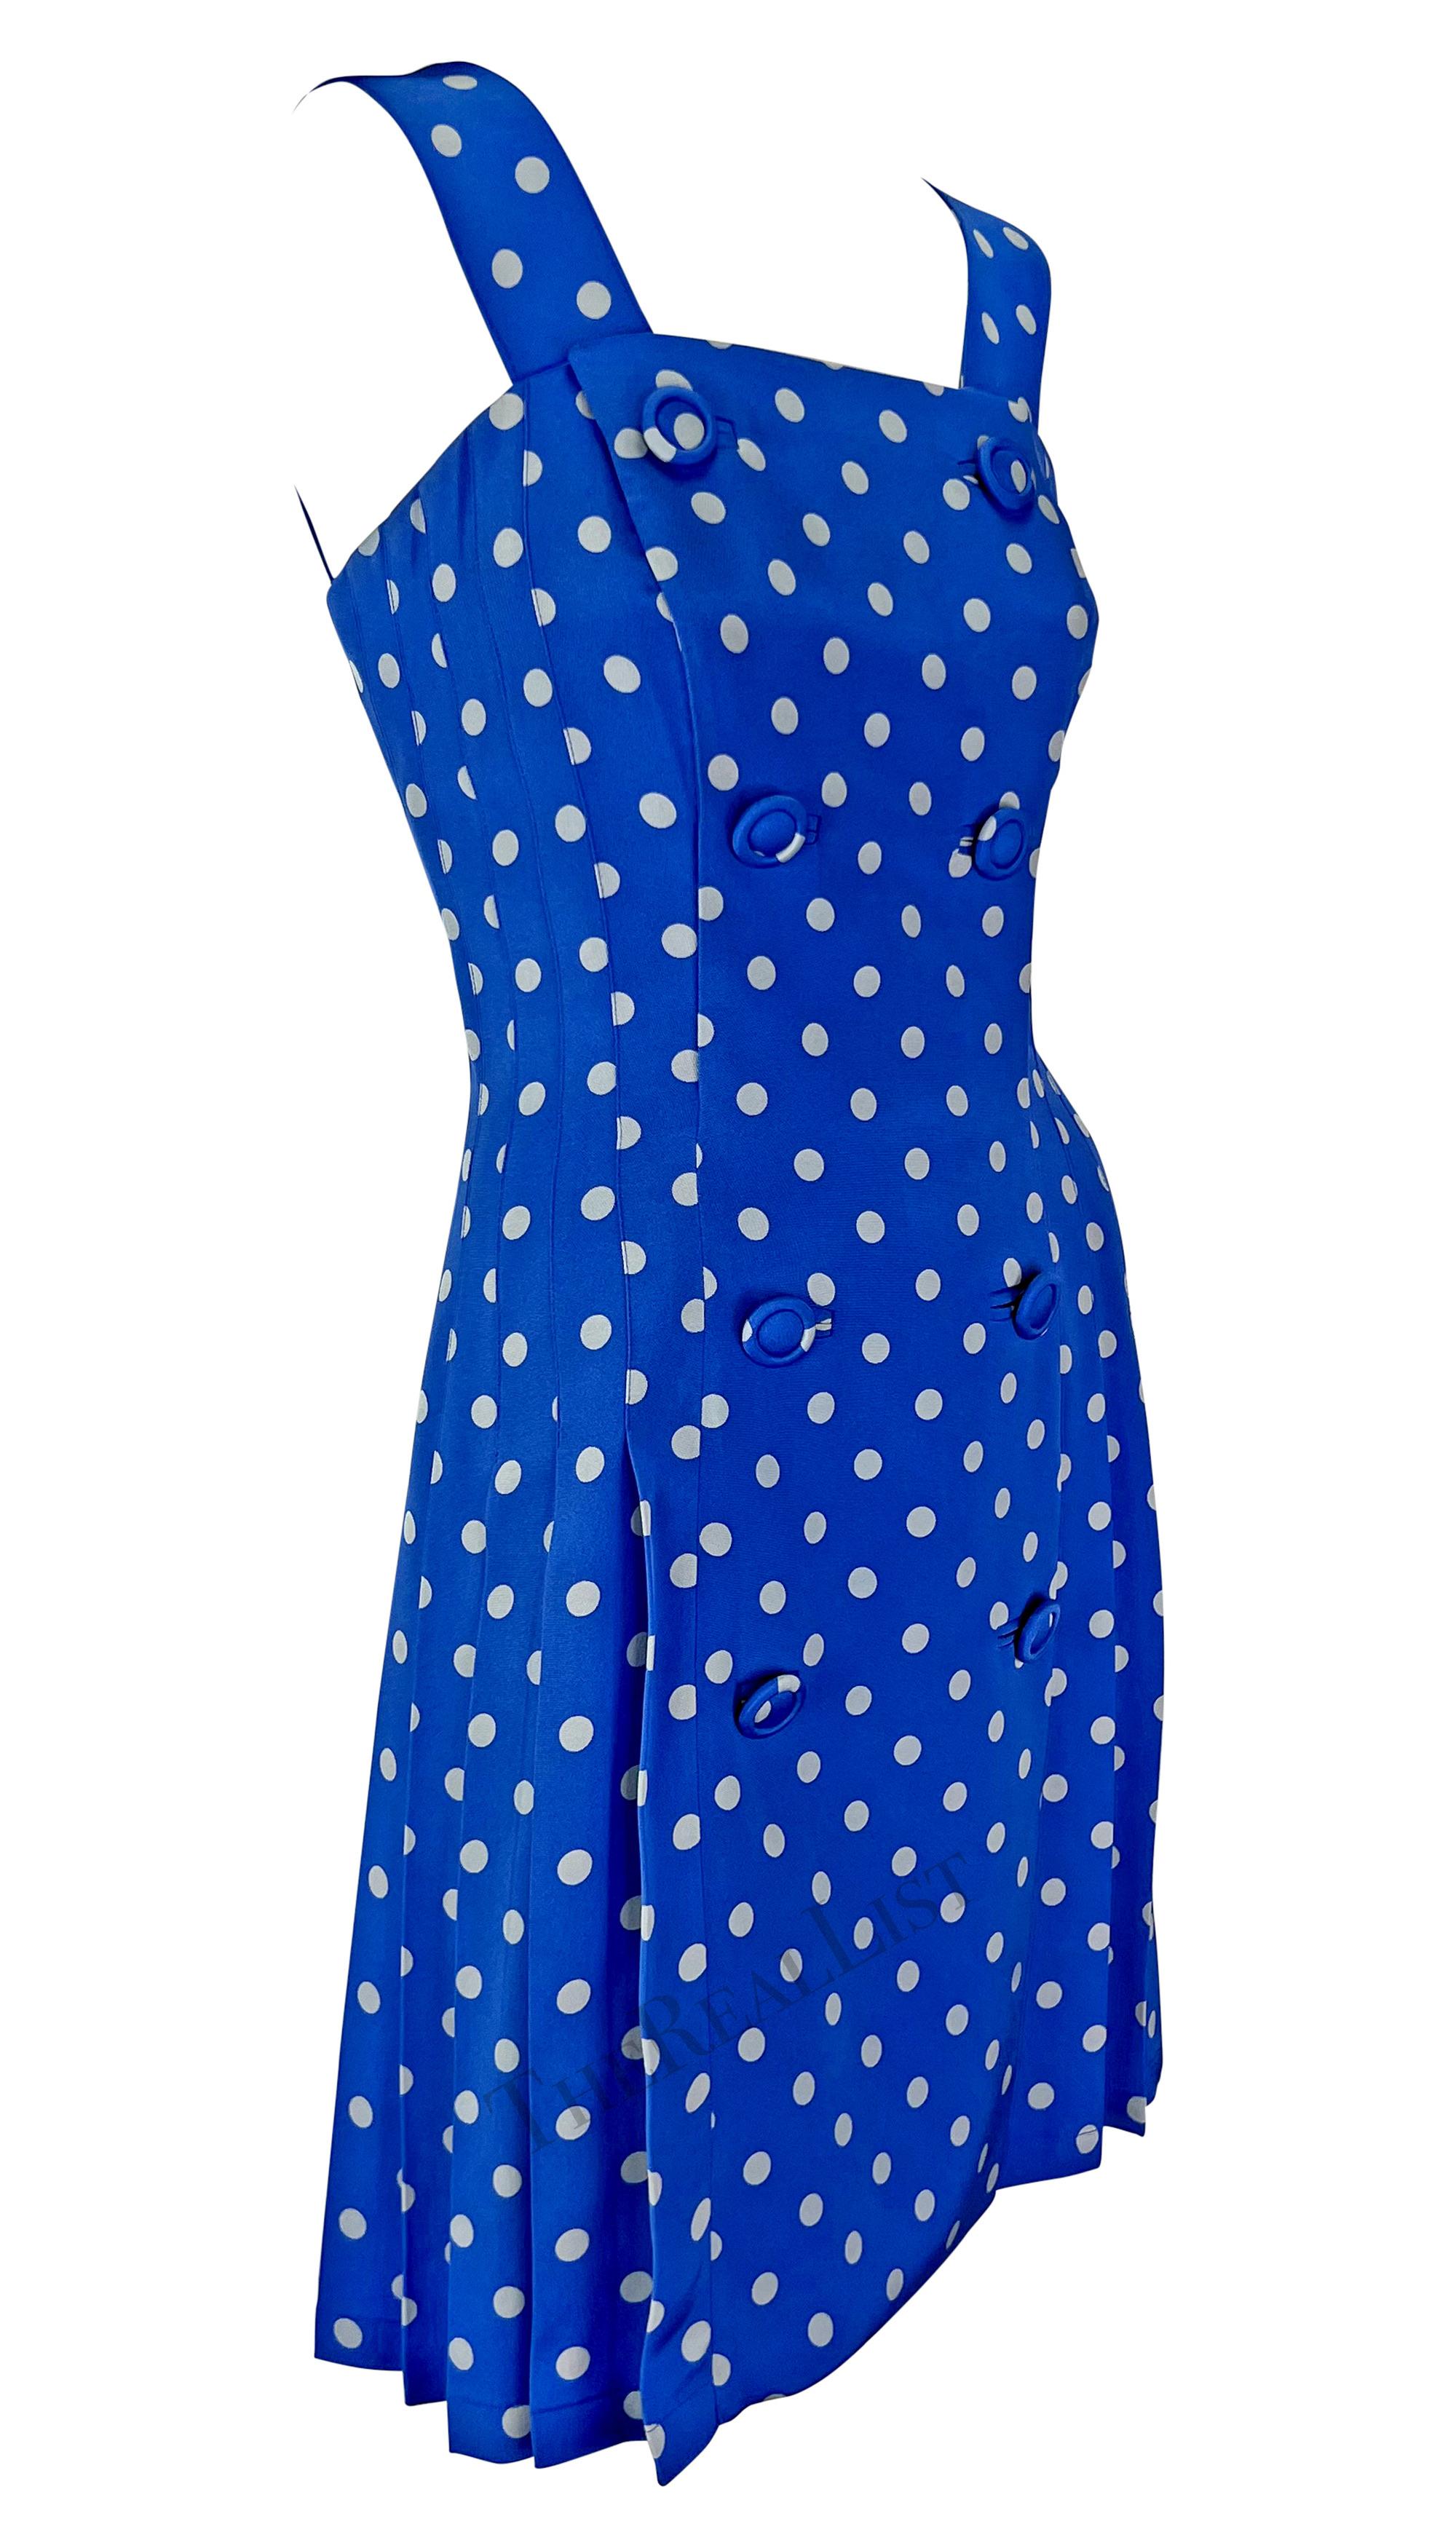 S/S 1994 Gianni Versace Runway Blue Polka Dot Pleated Double Breasted Dress For Sale 3